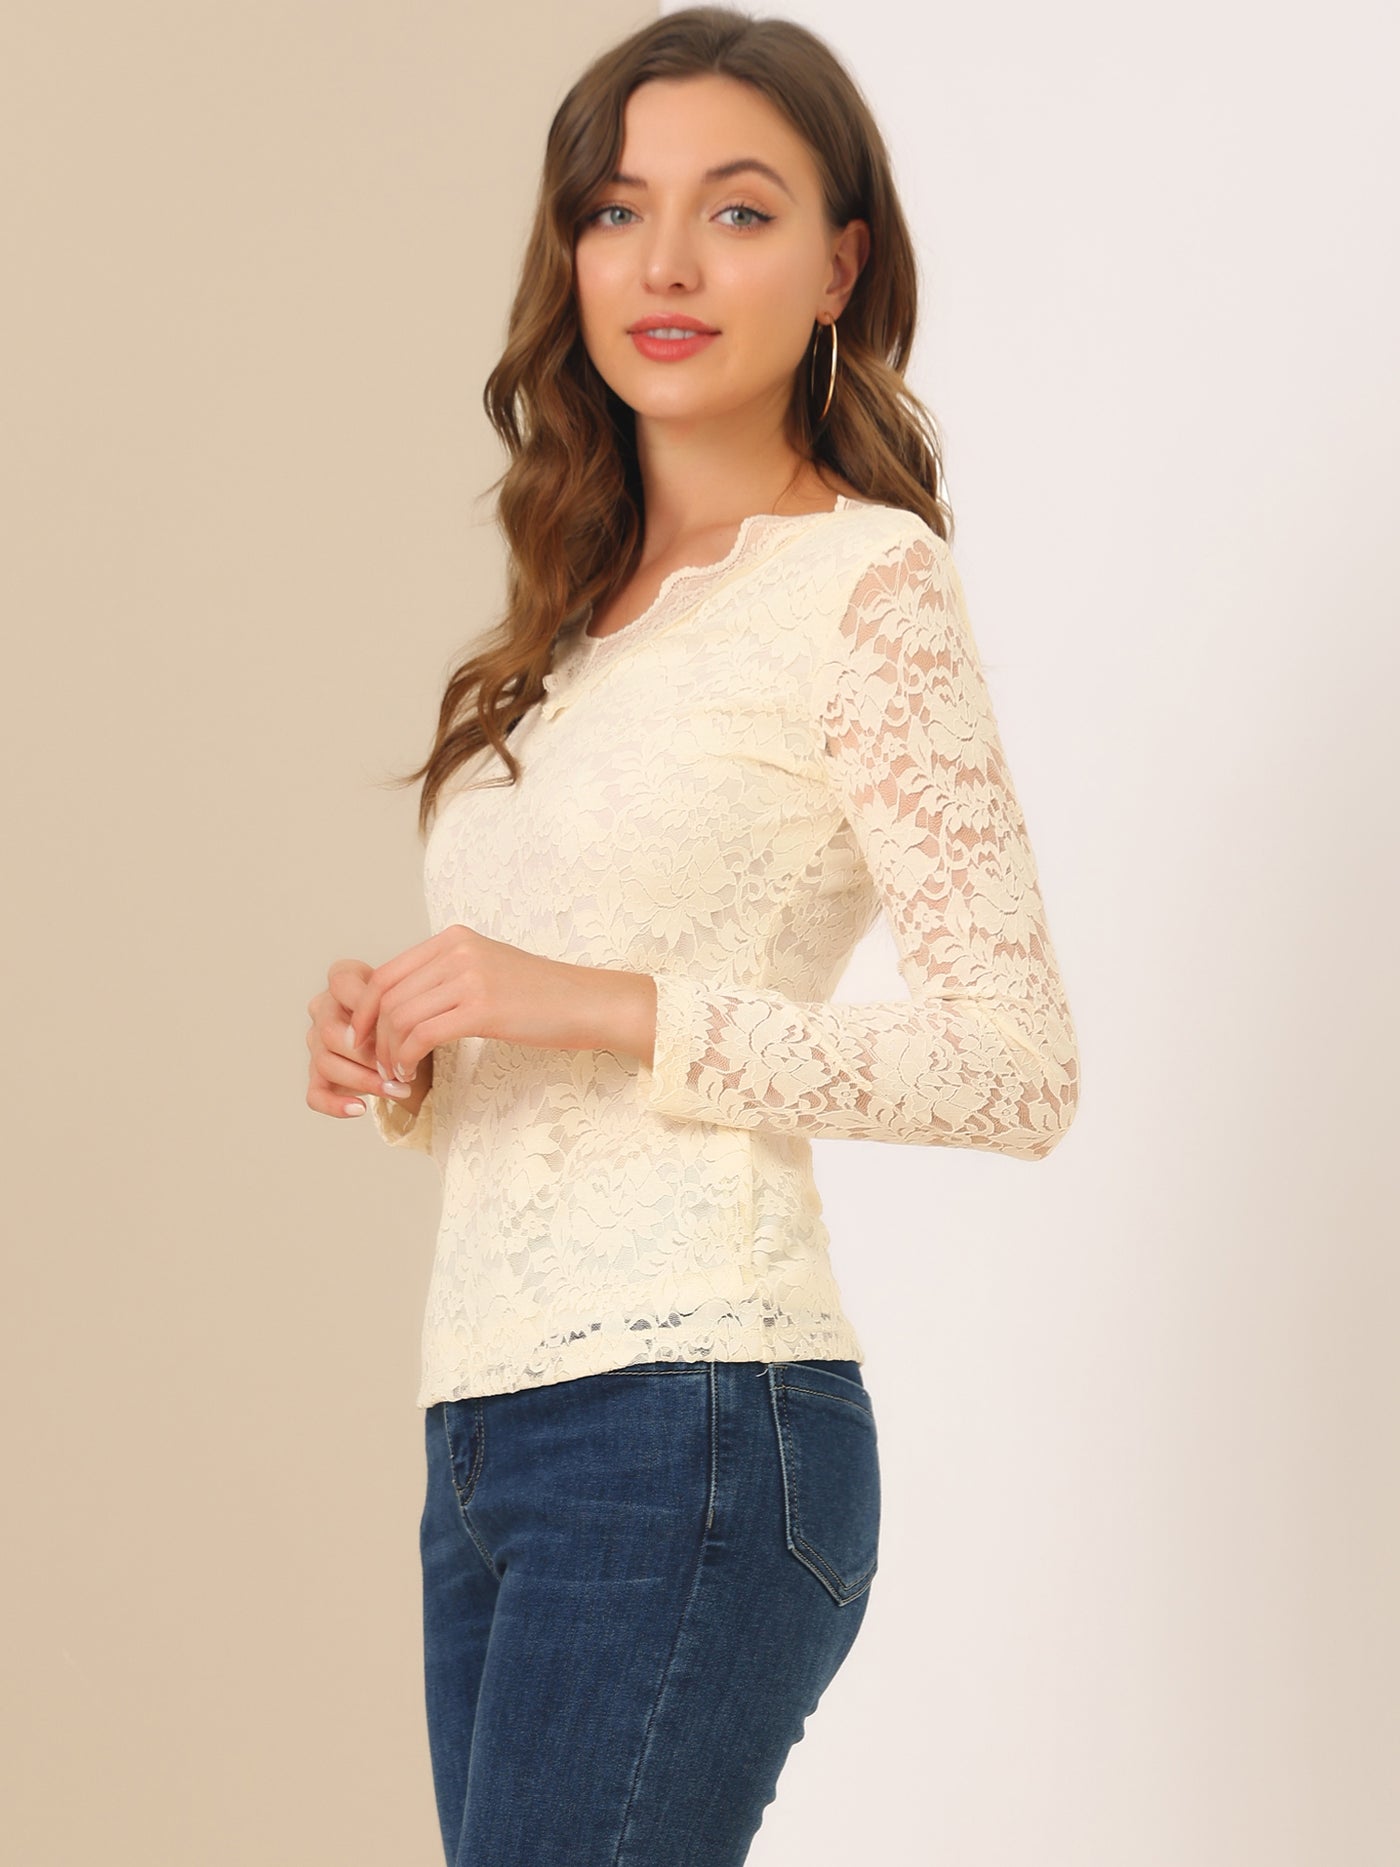 Allegra K Floral Embroidery Sheer Long Sleeve Lace Blouse Top